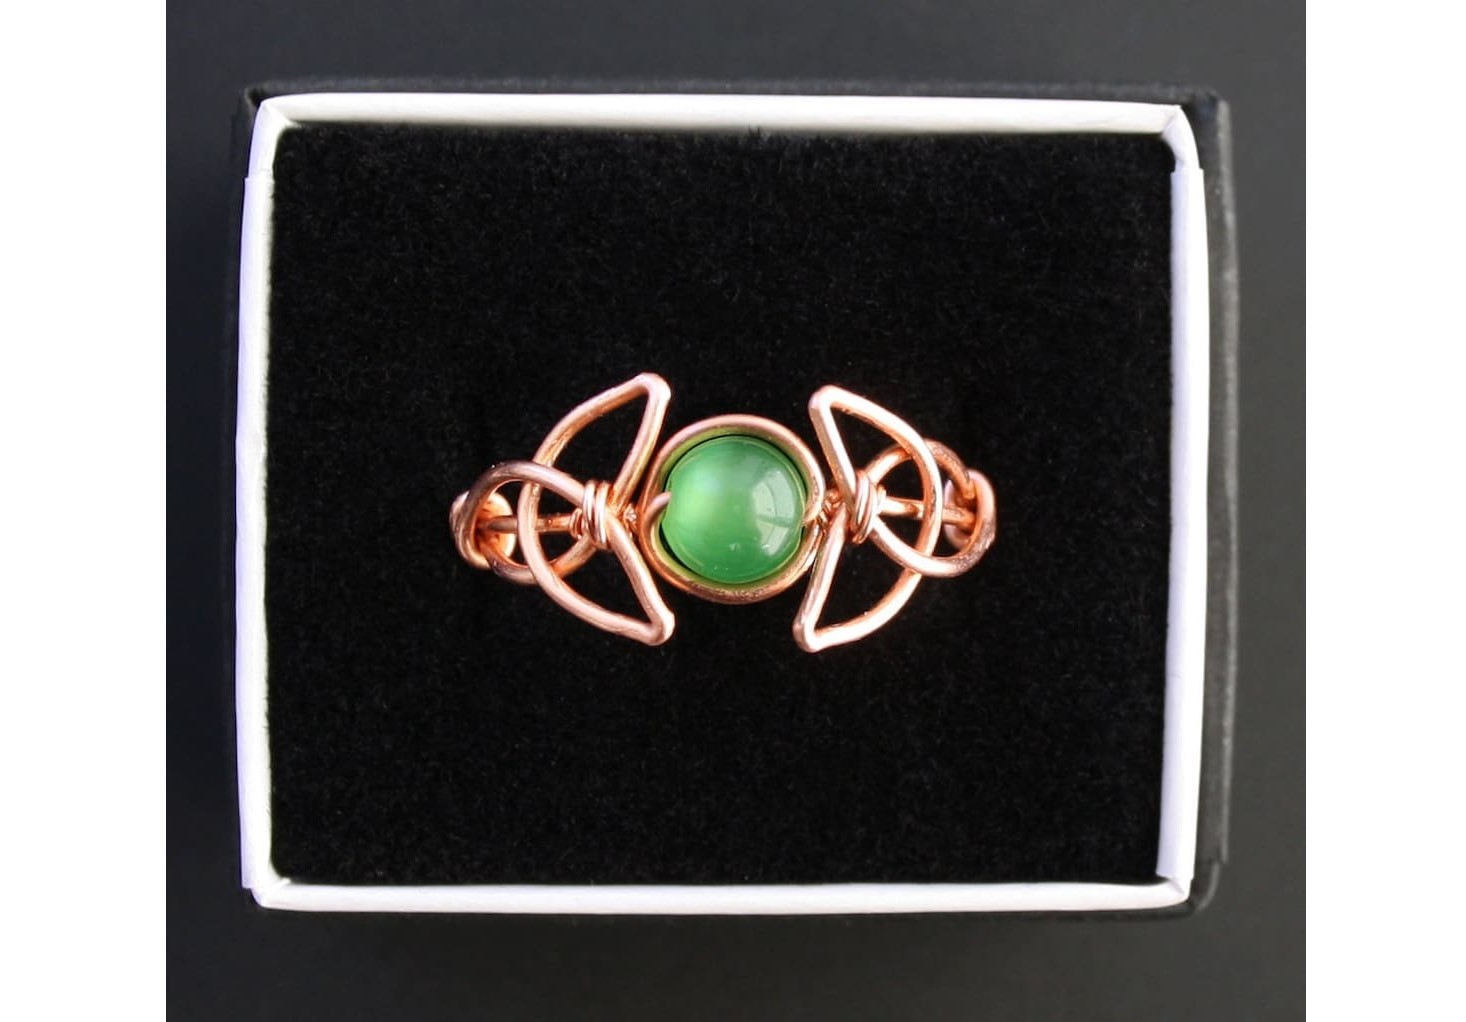 Celtic knot ring tutorial - Crafts on display